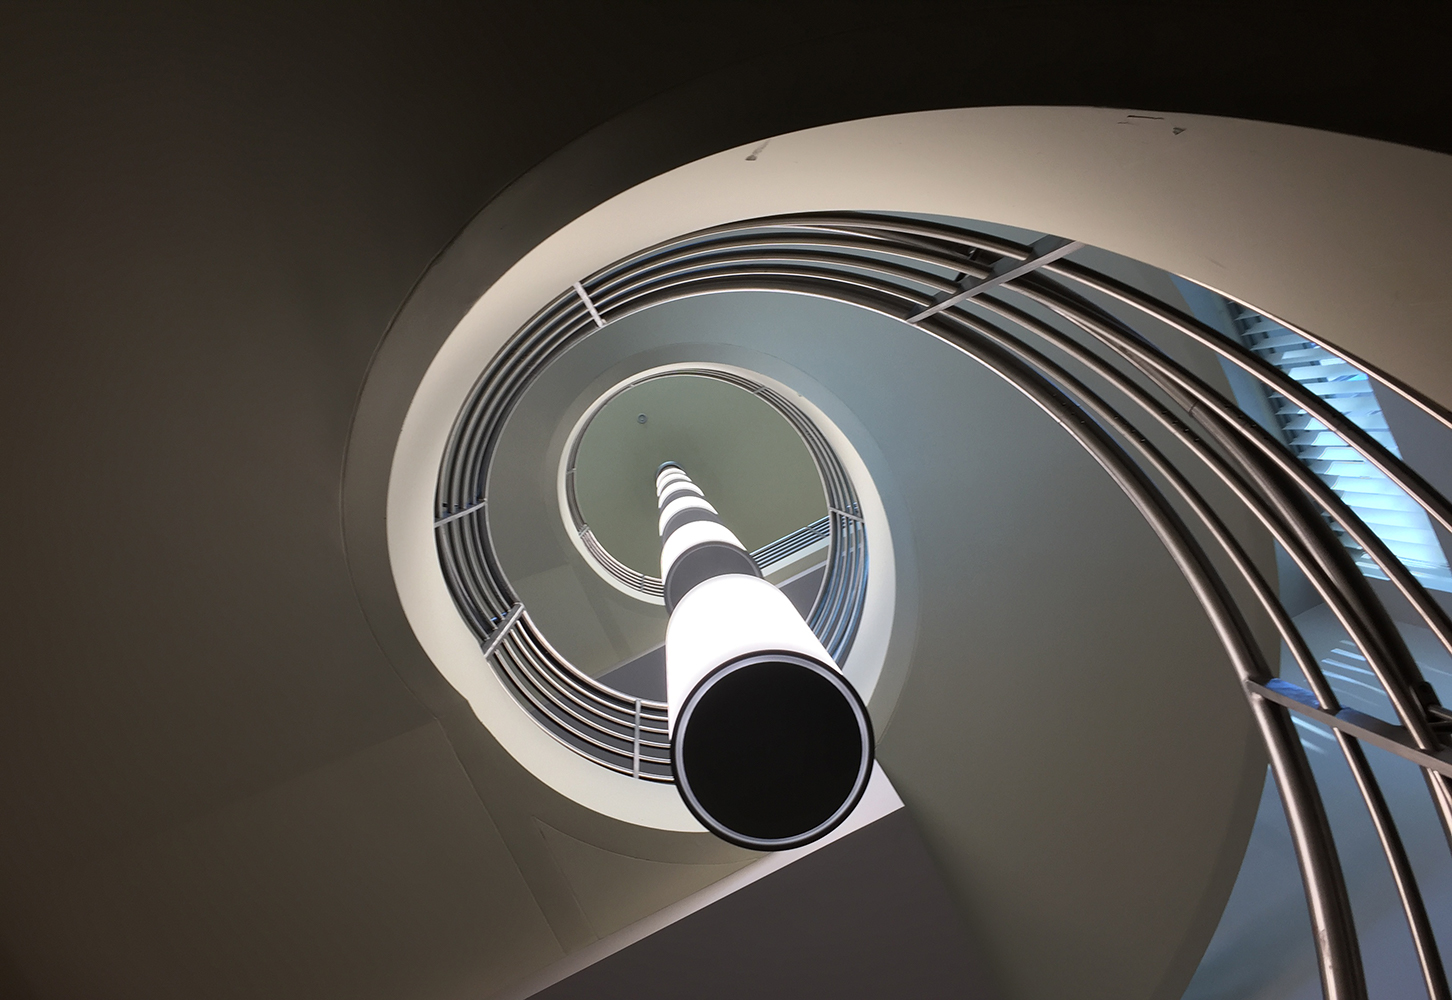 These clean, cylindrical custom light fixtures are hung in tandem down the center of round office stairwell